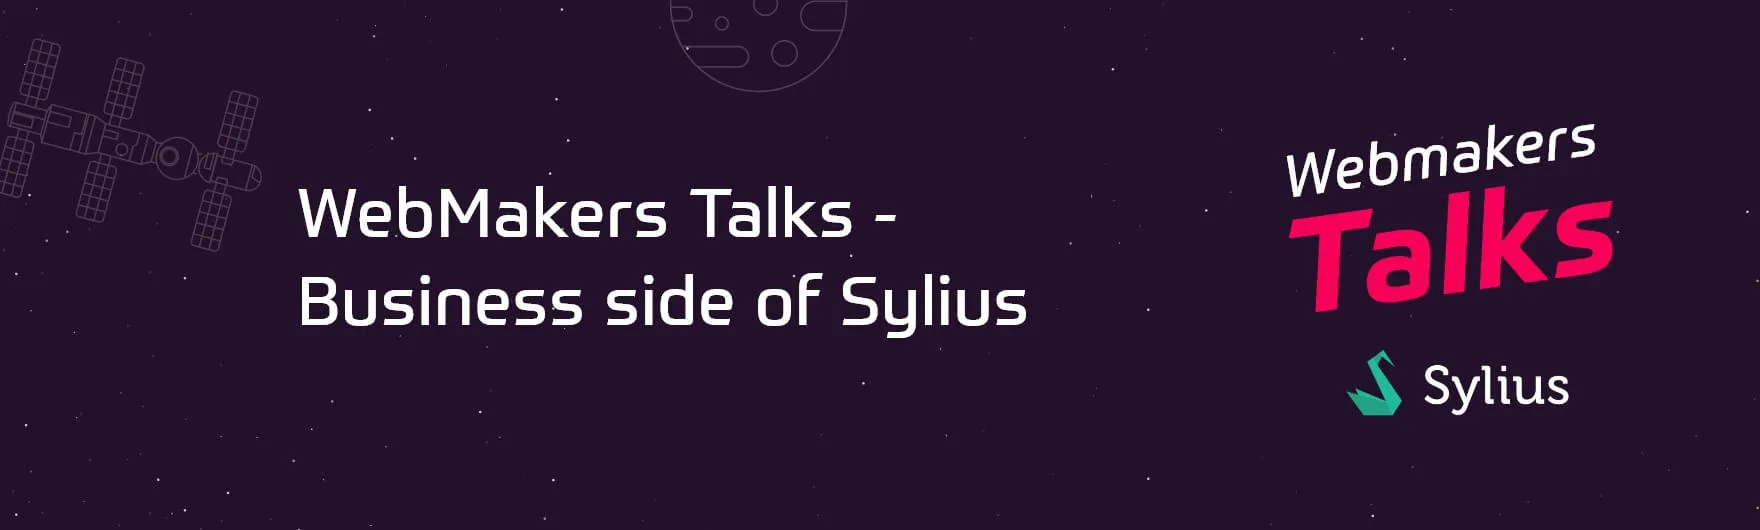 WebMakers Talks - business side of Sylius